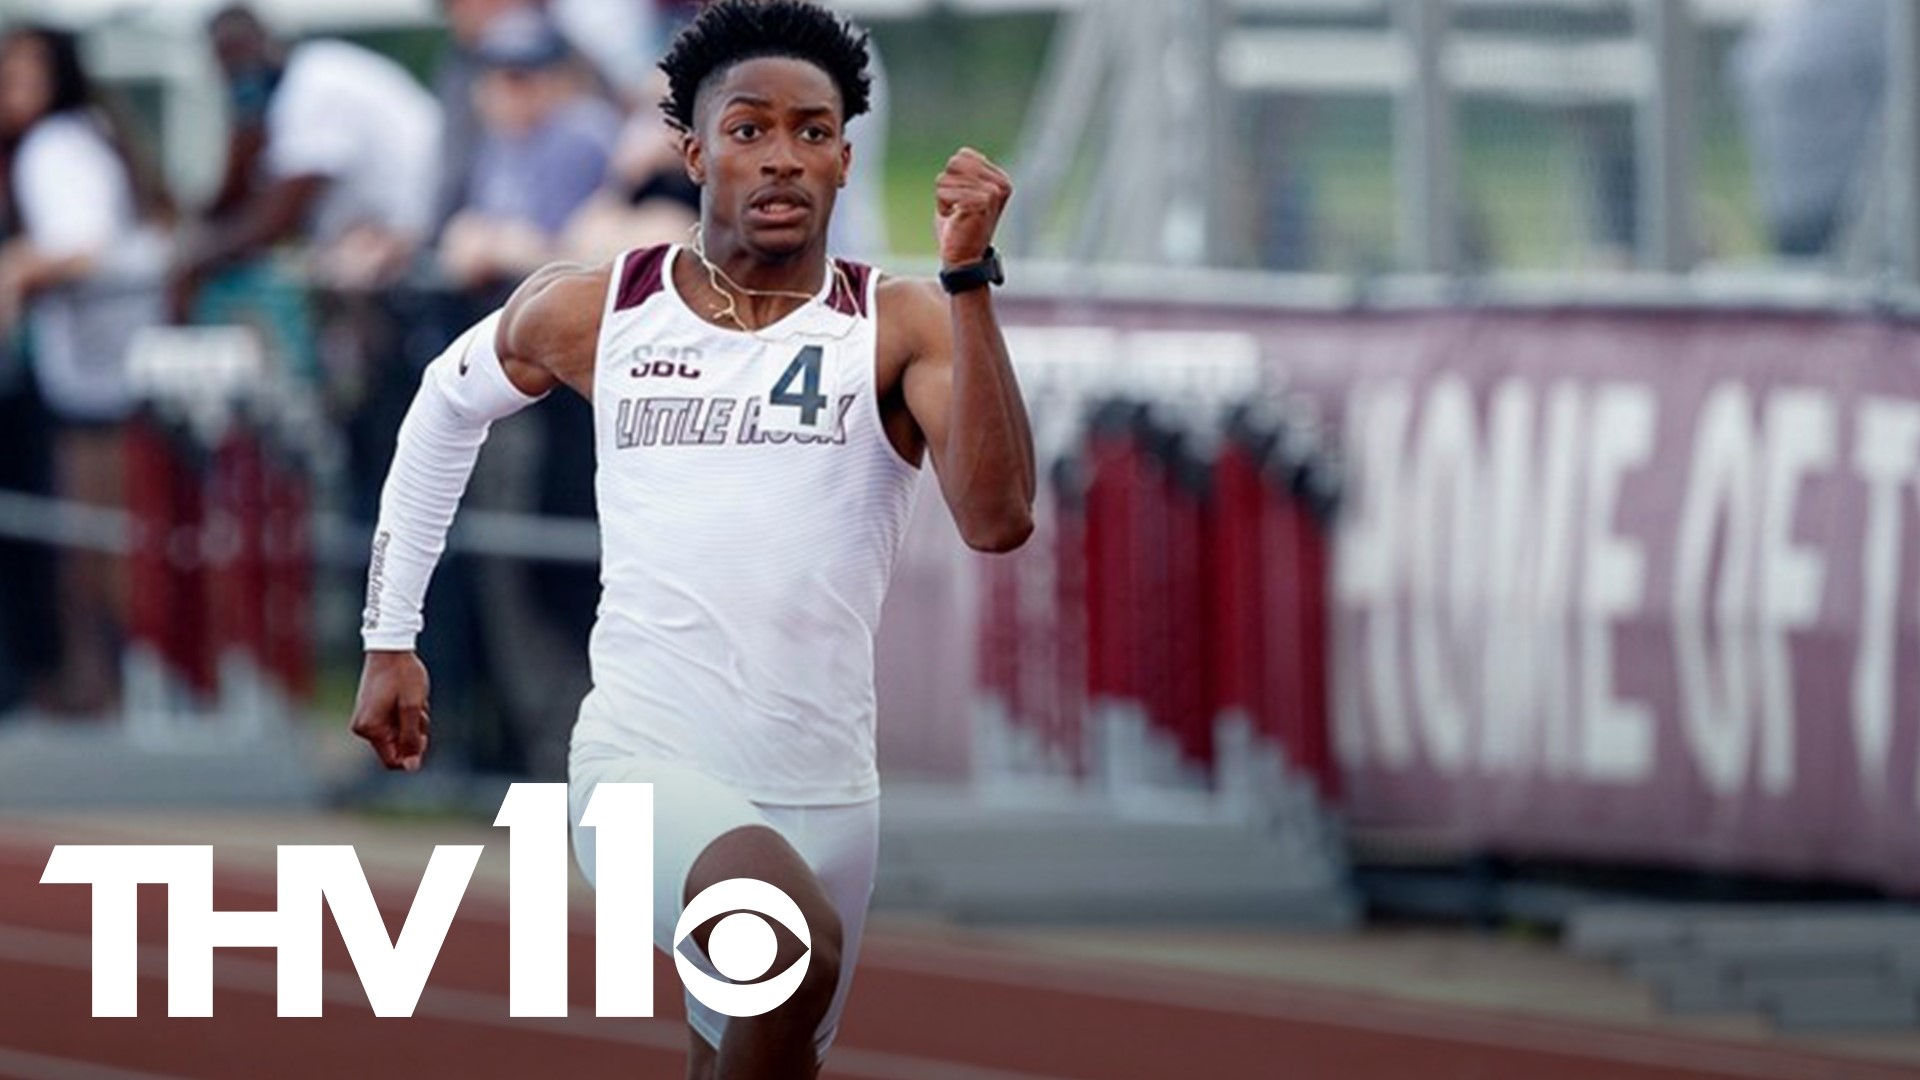 Little Rock's Cameron Jackson broke a school record with a time of 10.10 in the 100 meters.